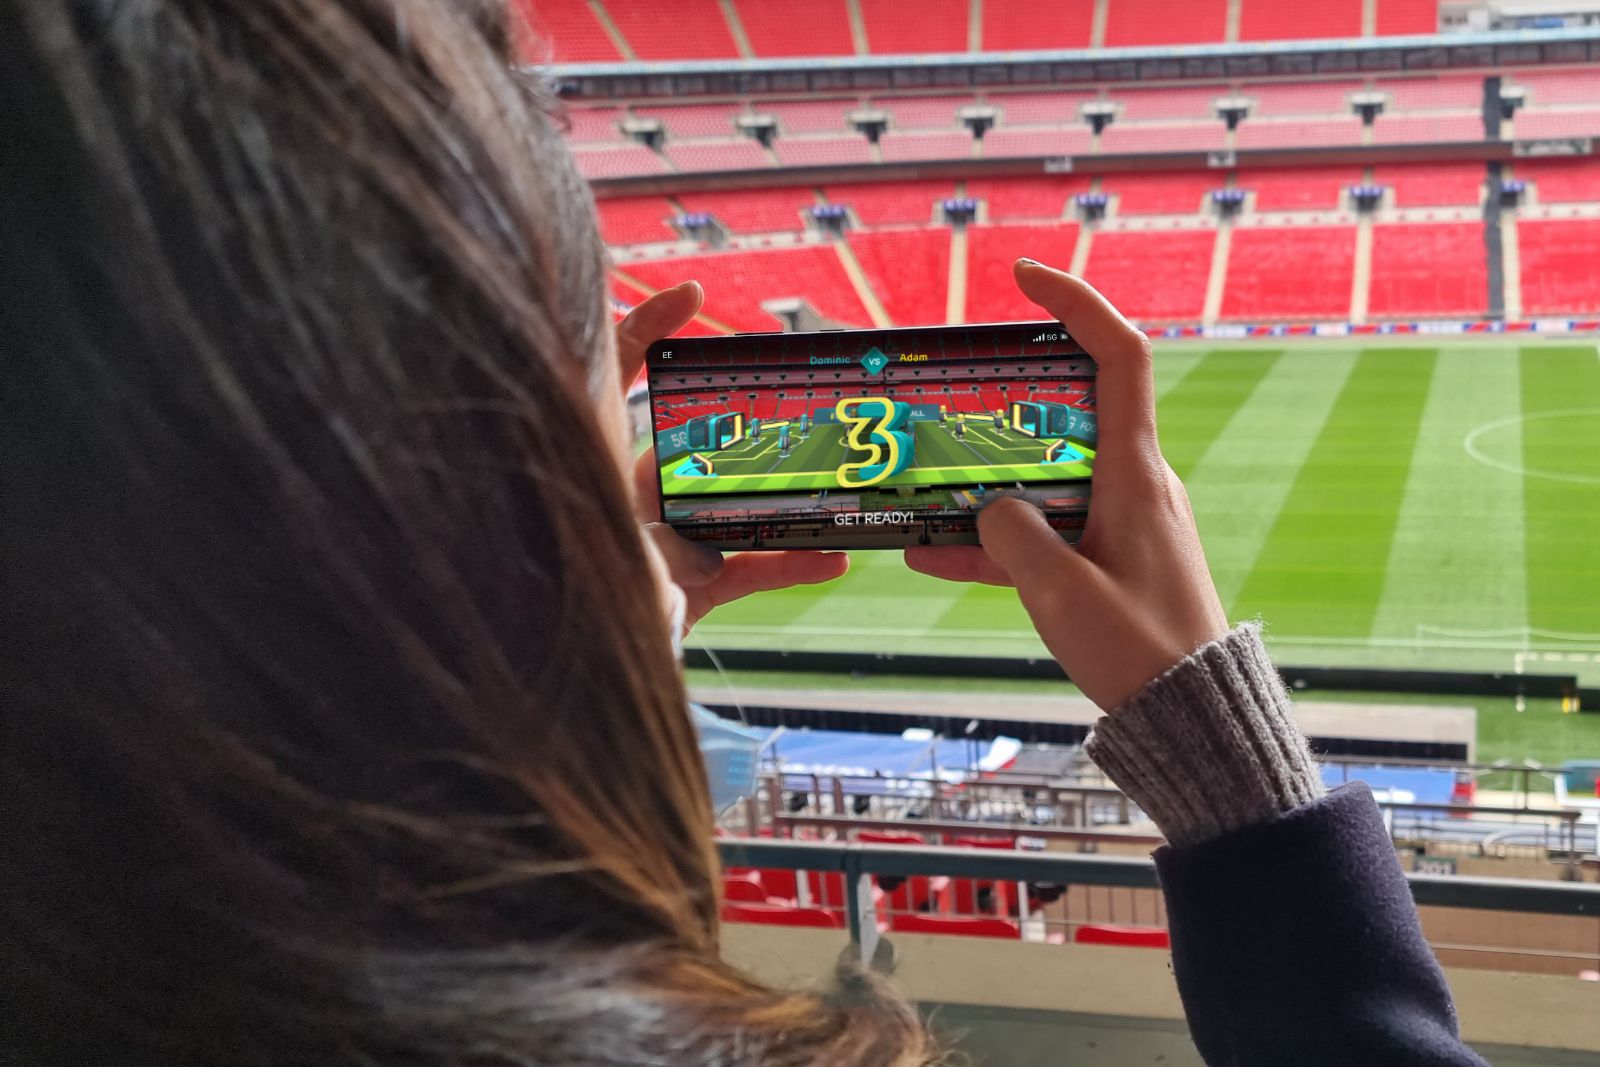 How EE's AR foosball superimposed 3D graphics directly onto the Wembley pitch photo 1